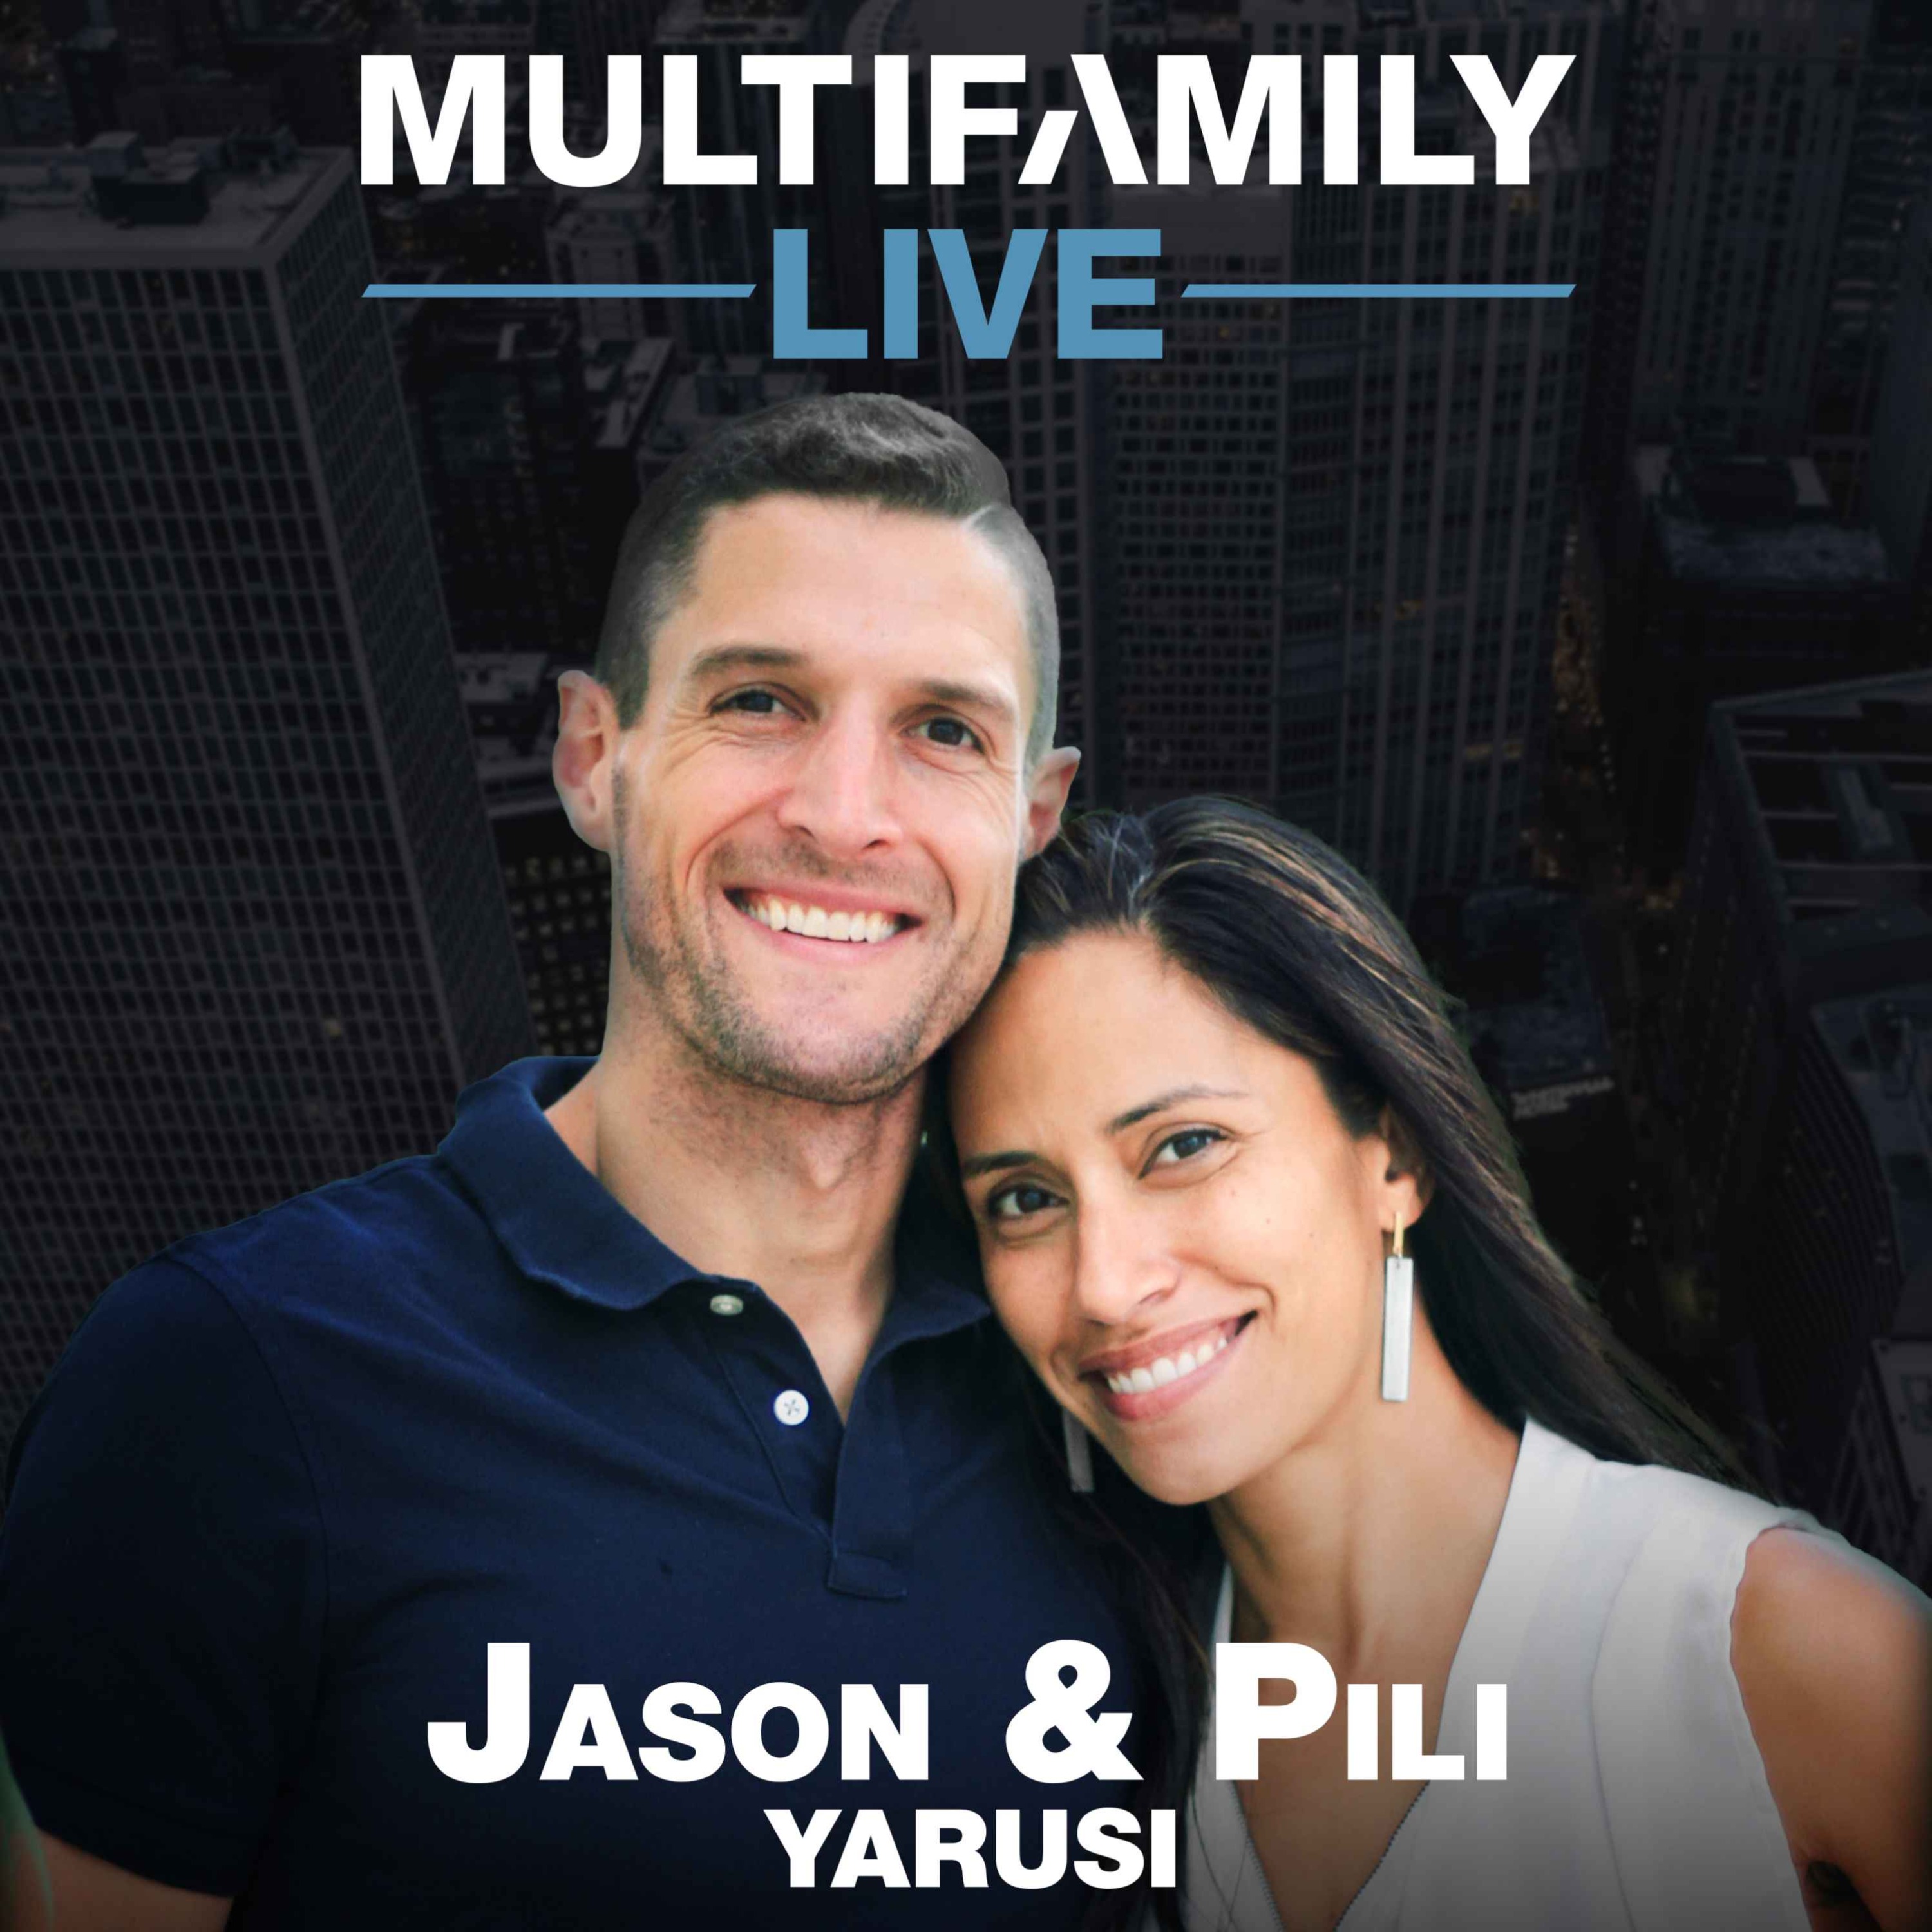 Building a $125 Multifamily Real Estate Empire as Busy Healthcare Professionals (with Julius Oni and Leslie Awasom)